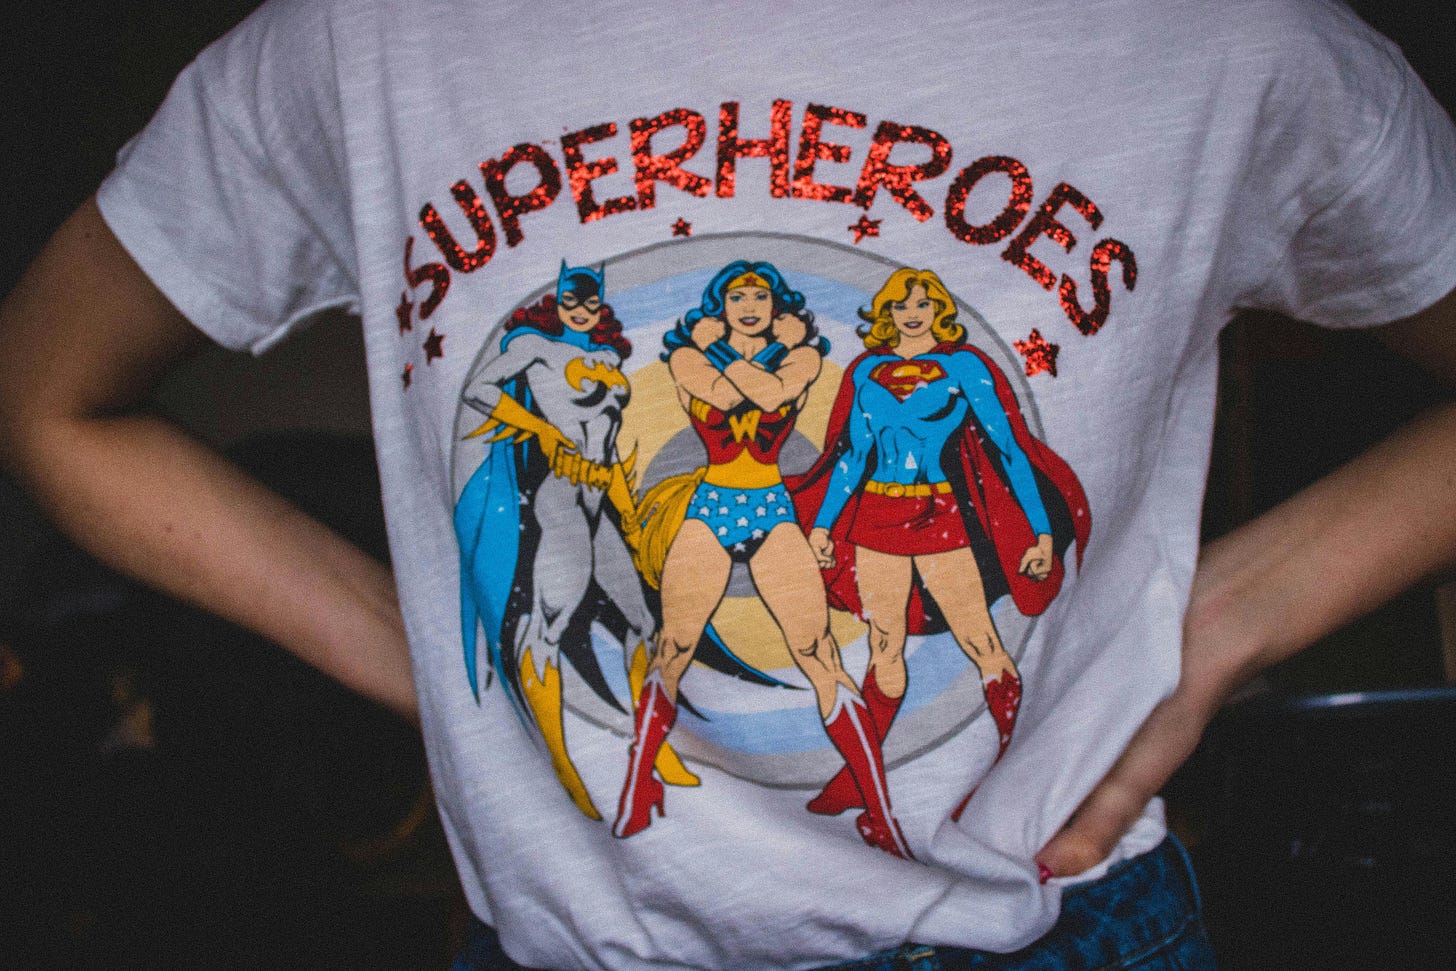 Person wearing a shirt depicting multiple superhero characters